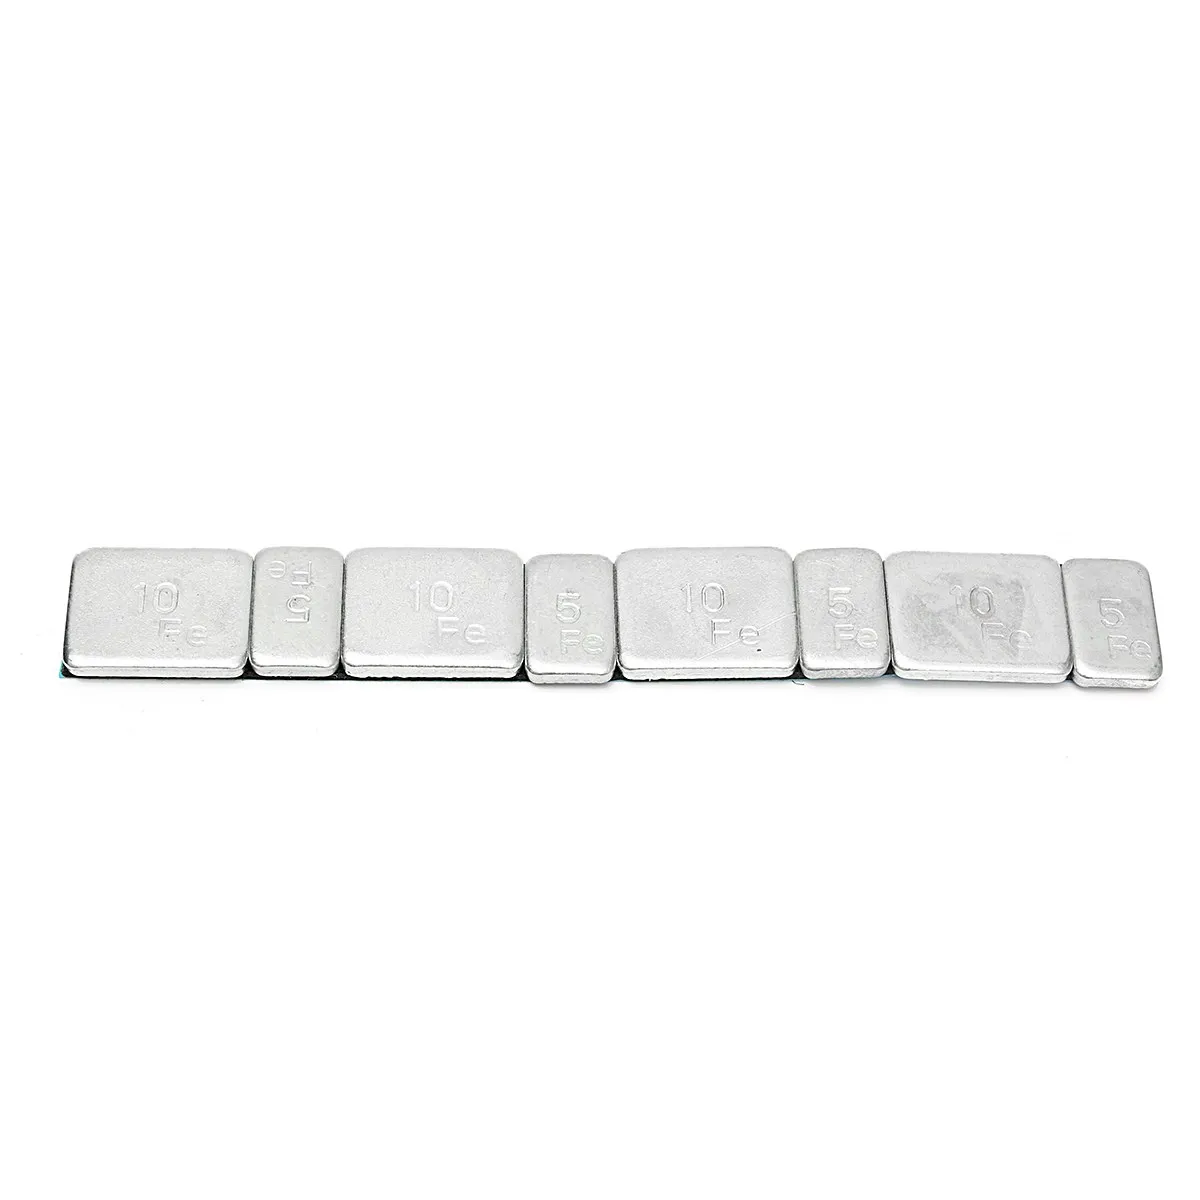 Image 10 X 60g Auto Part Adhesive Wheel Tire Balance Weights Wheel Tyre Balancing Bar Sticker for Cars Motorbike RC boat